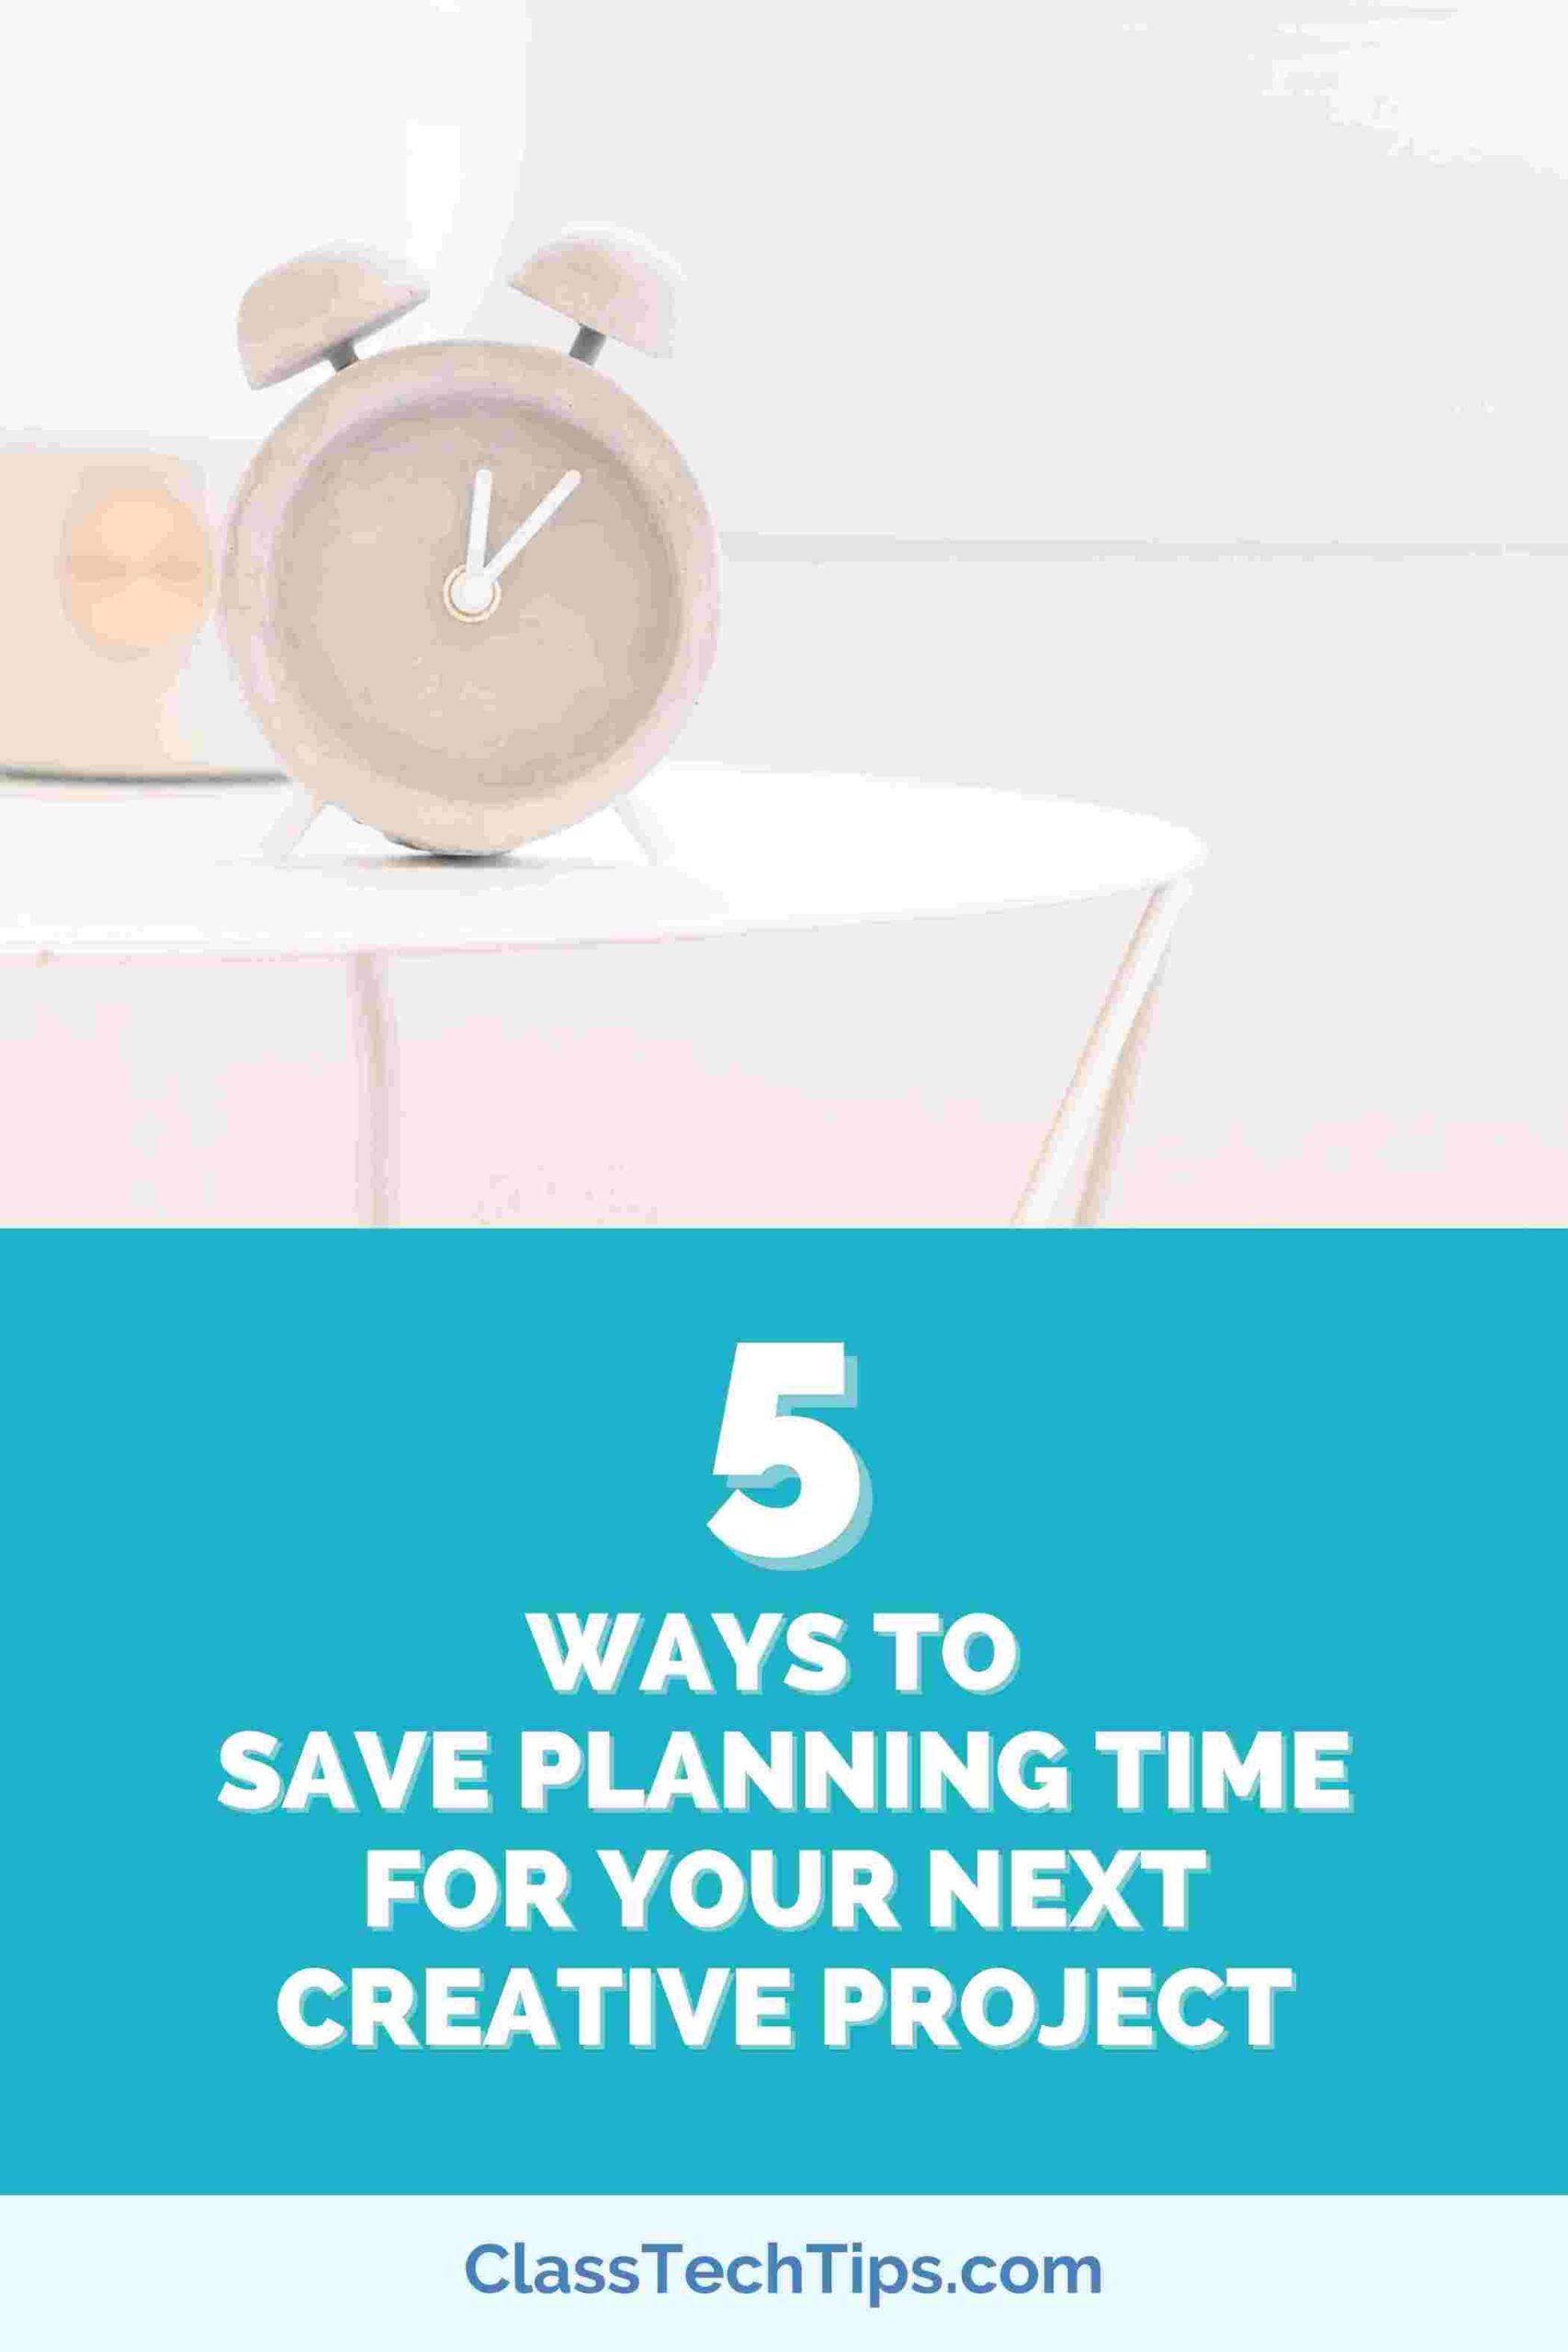 5 Ways to Save Planning Time for Your Next Creative Project